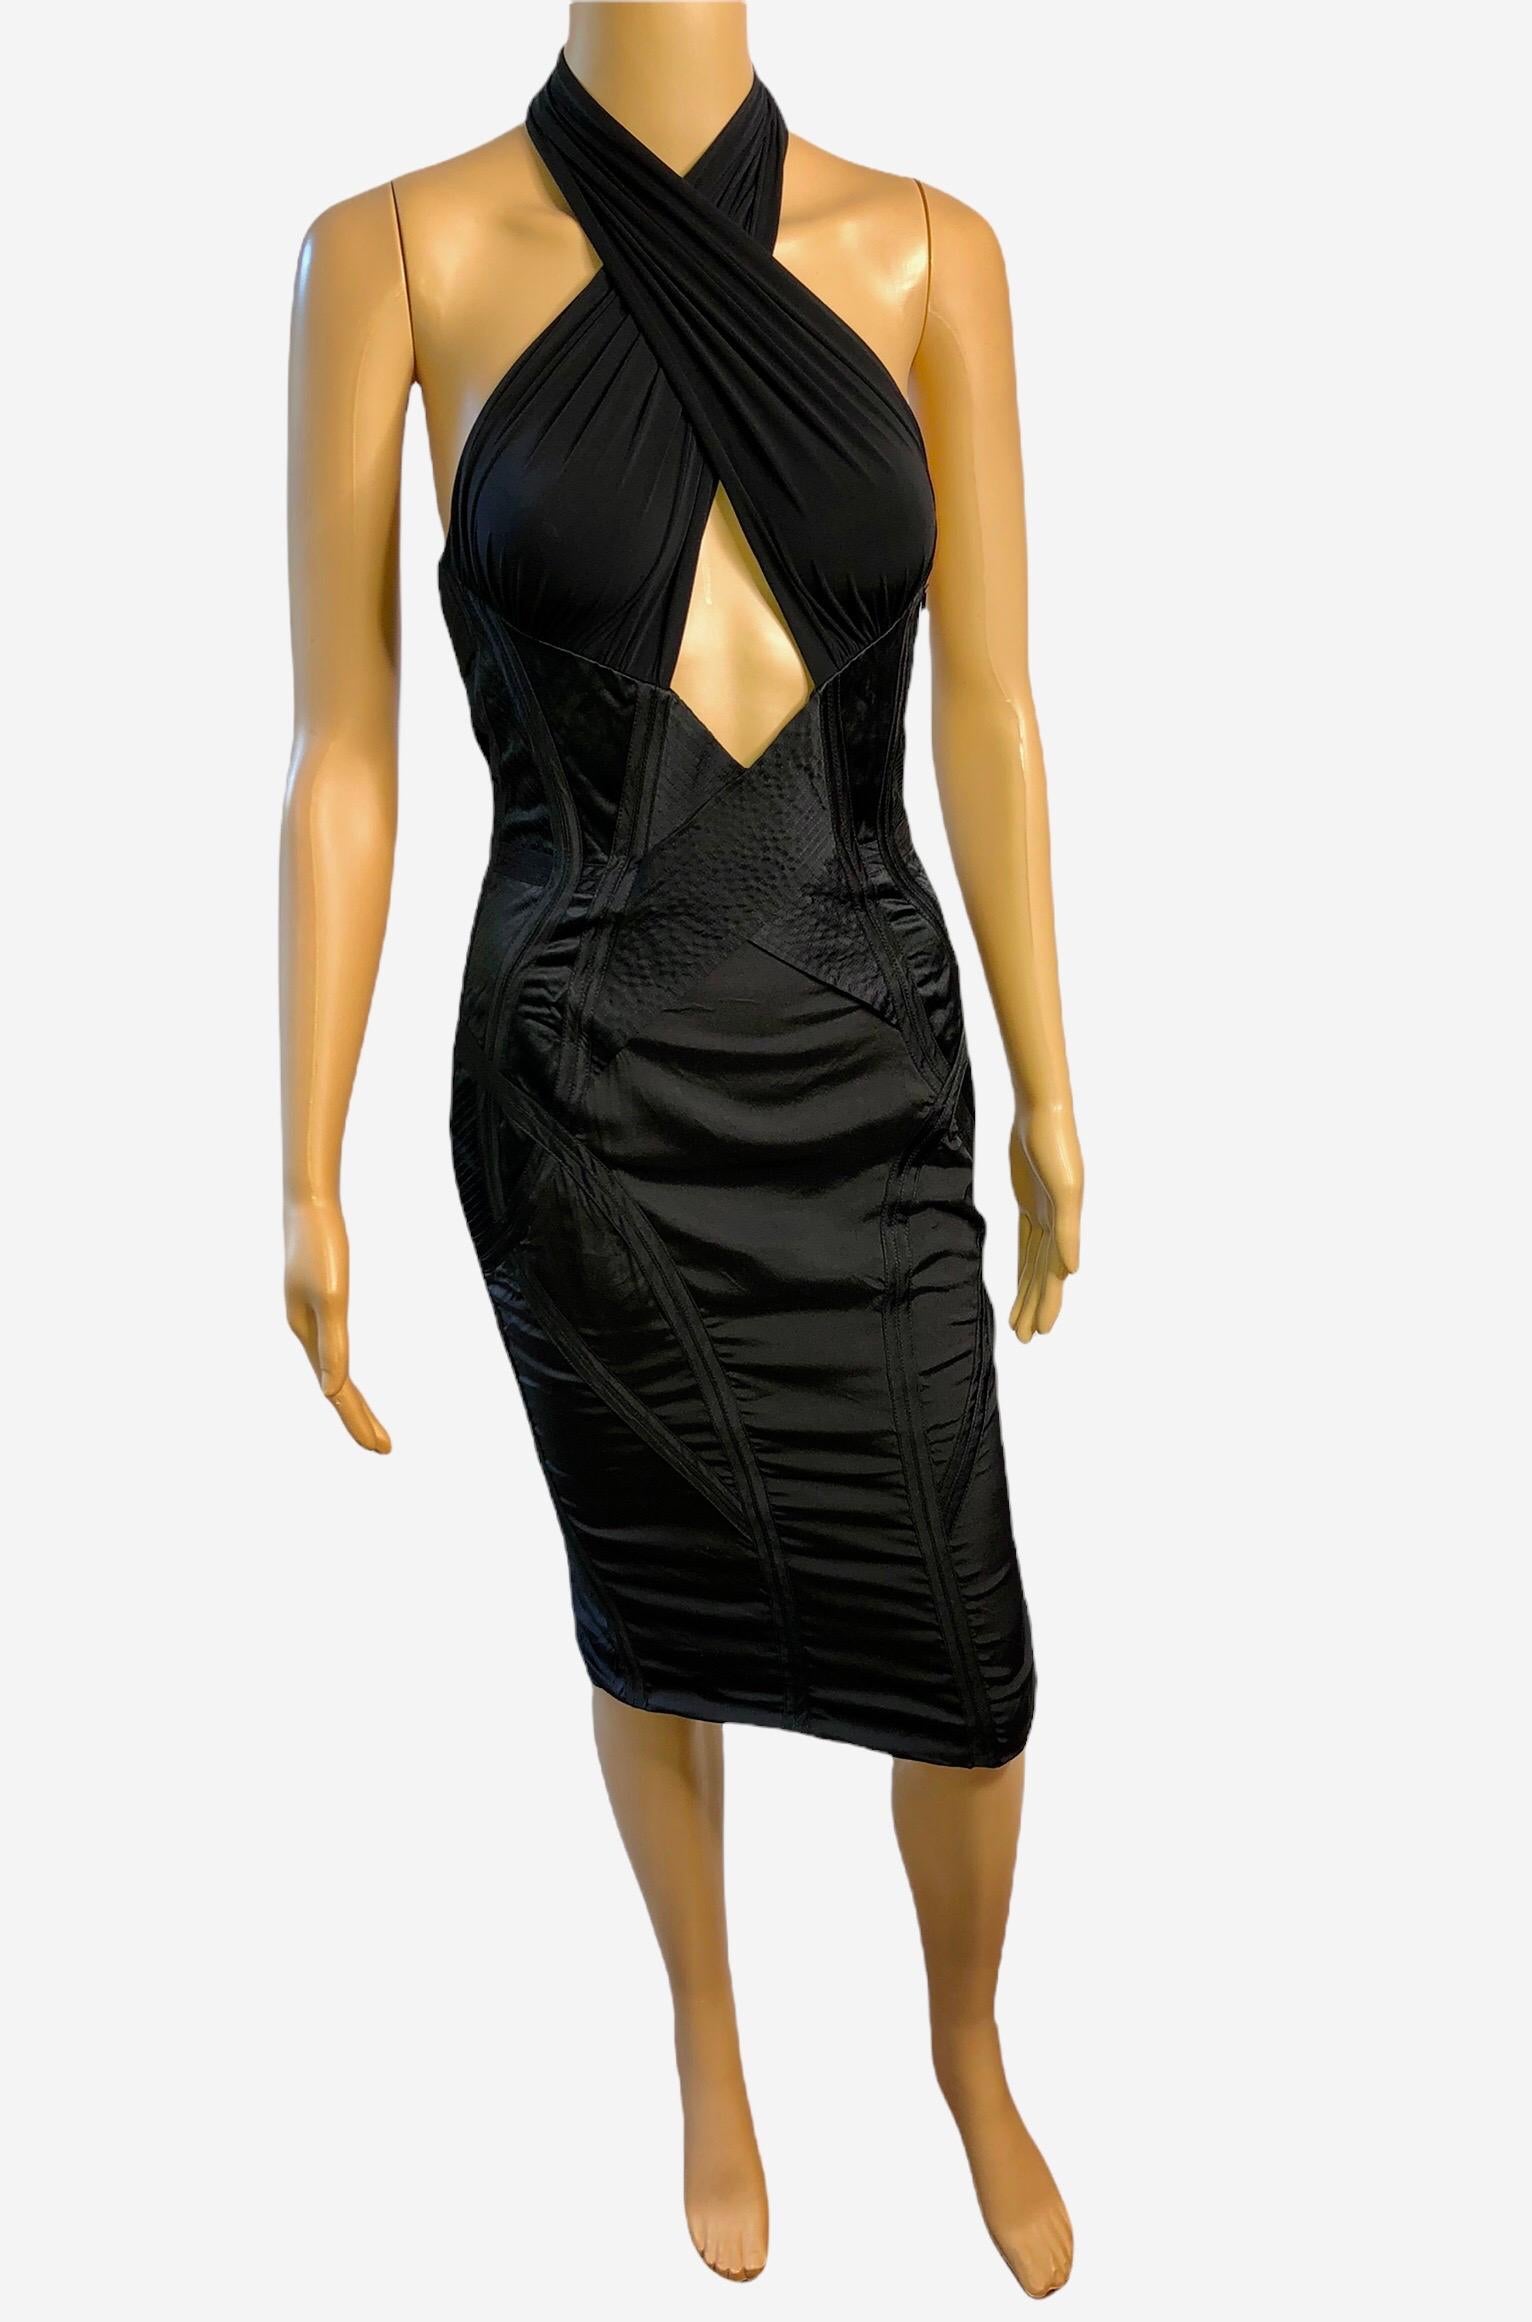 Tom Ford for Gucci F/W 2003 Runway Cutout Silk Black Dress IT 40

Look 35 from the Fall 2003 Collection.

